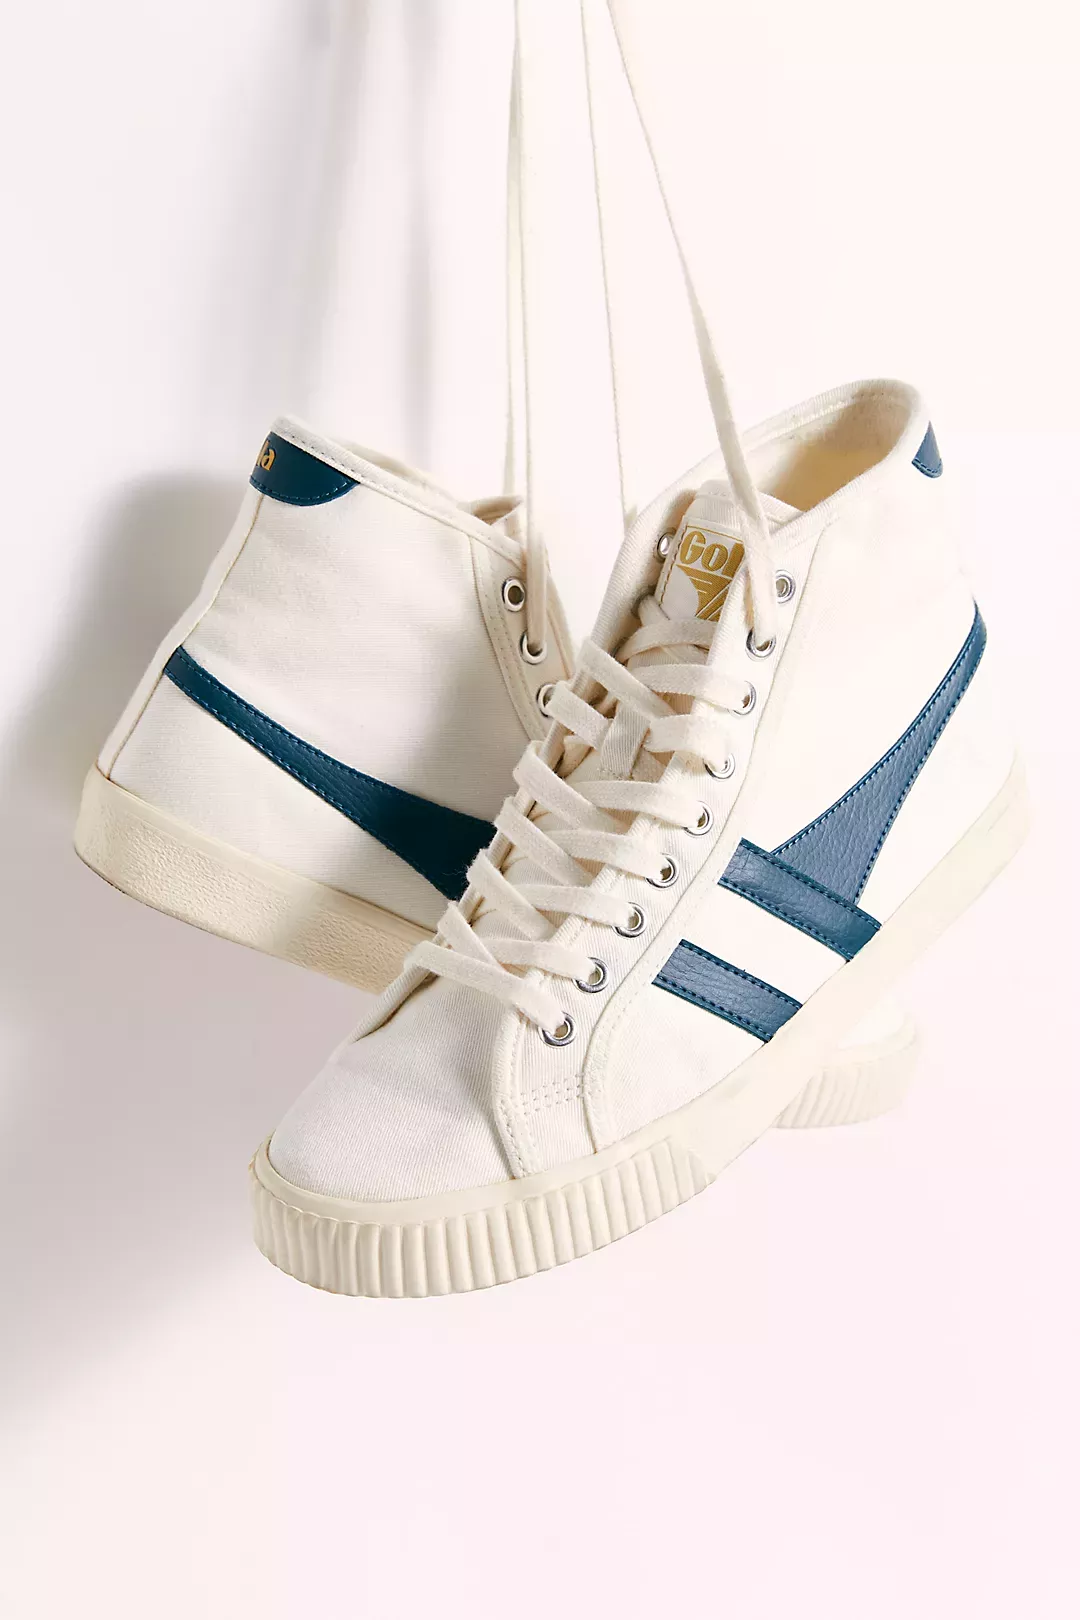 Get funky look with high top Sneakers